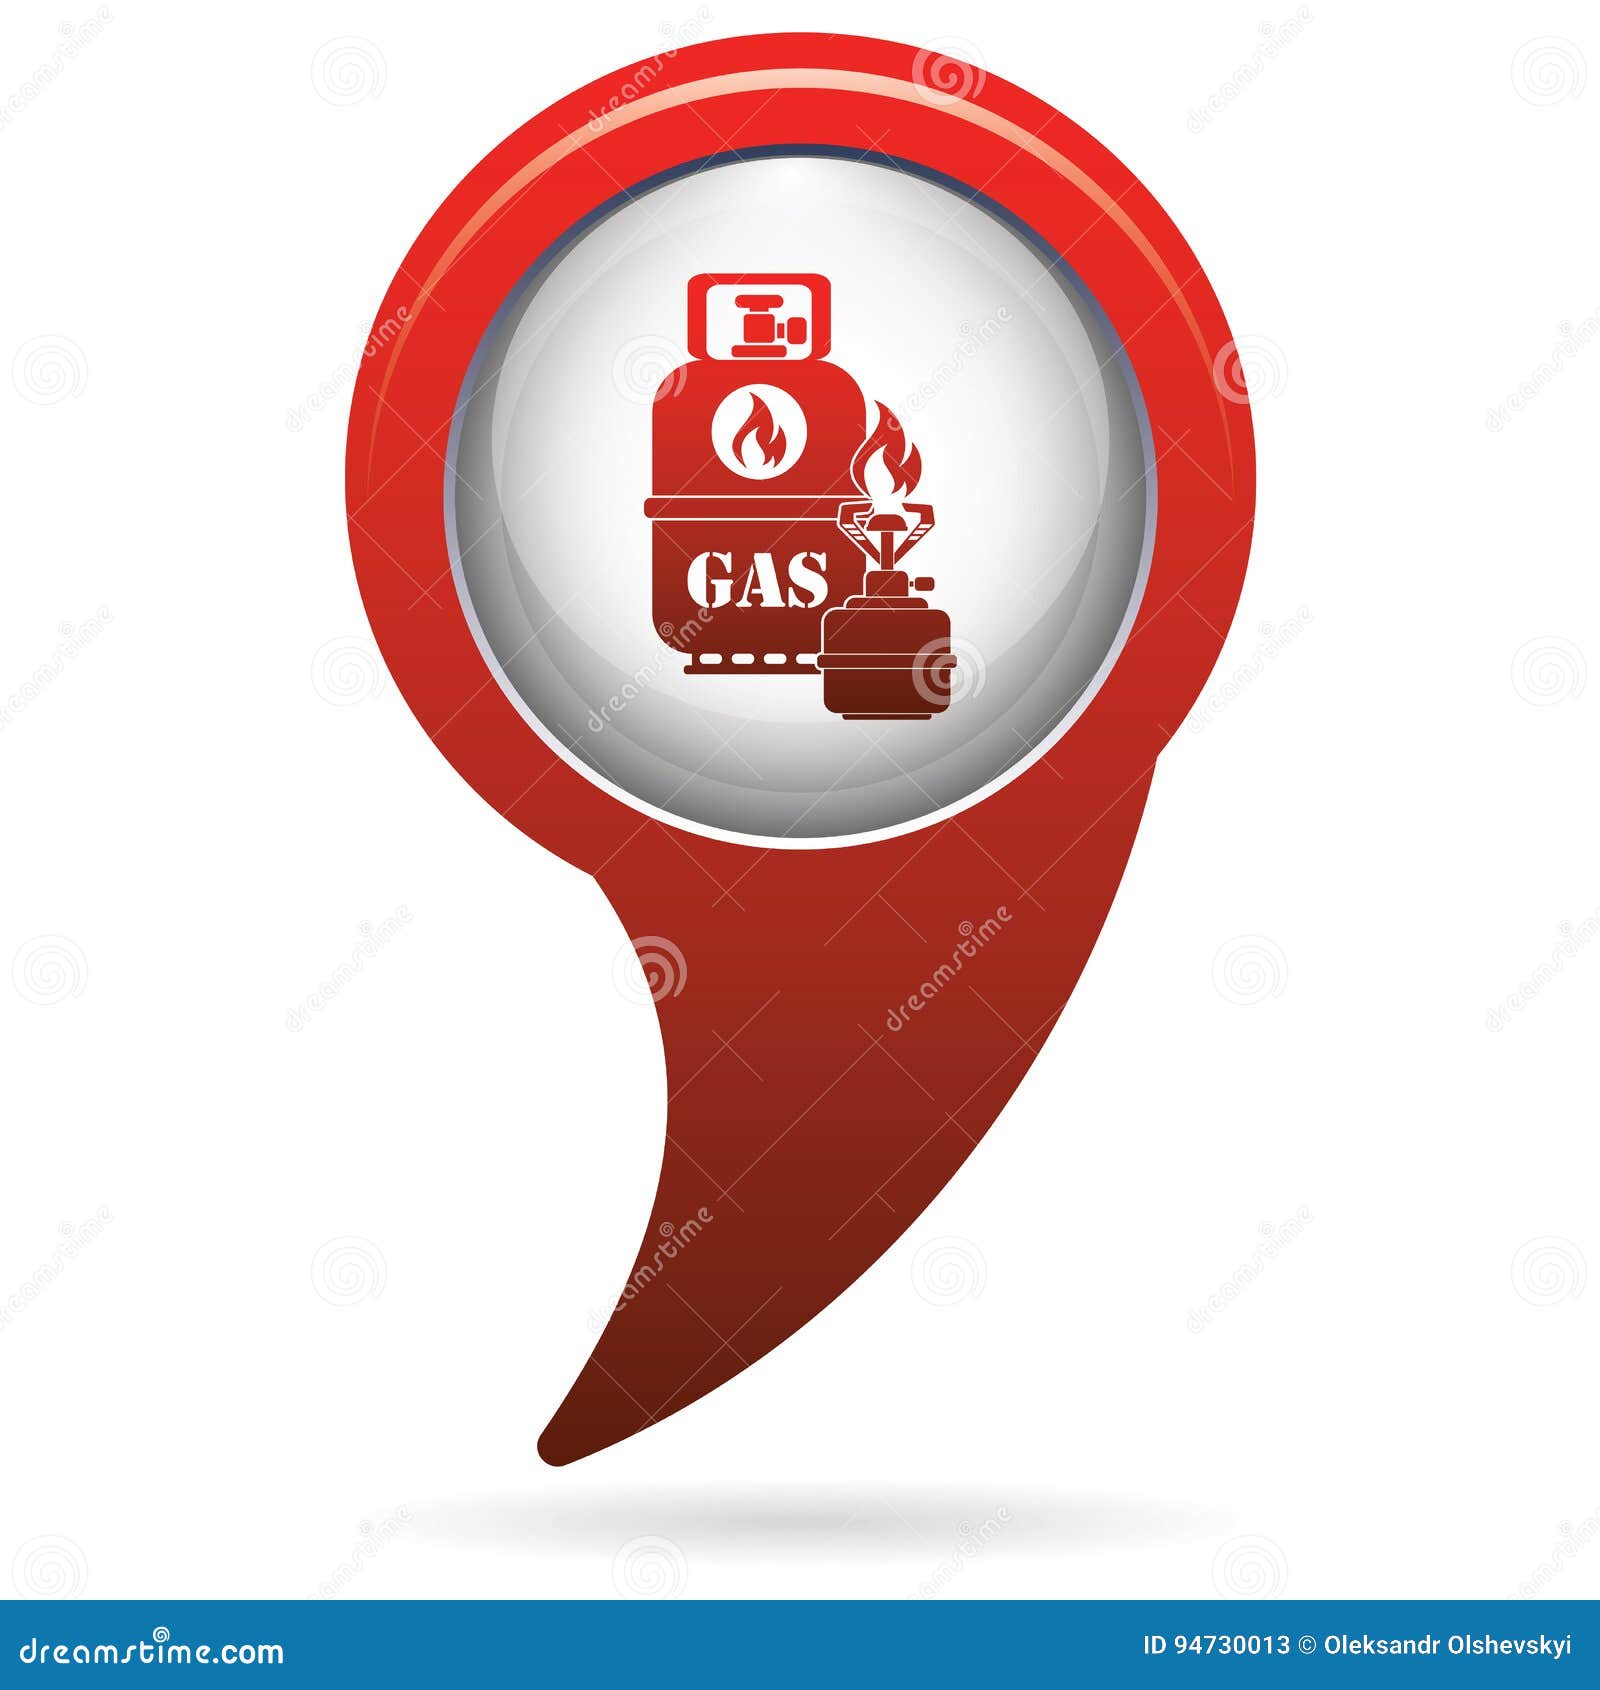 Camping stove with gas bottle icon. Vector illustration.